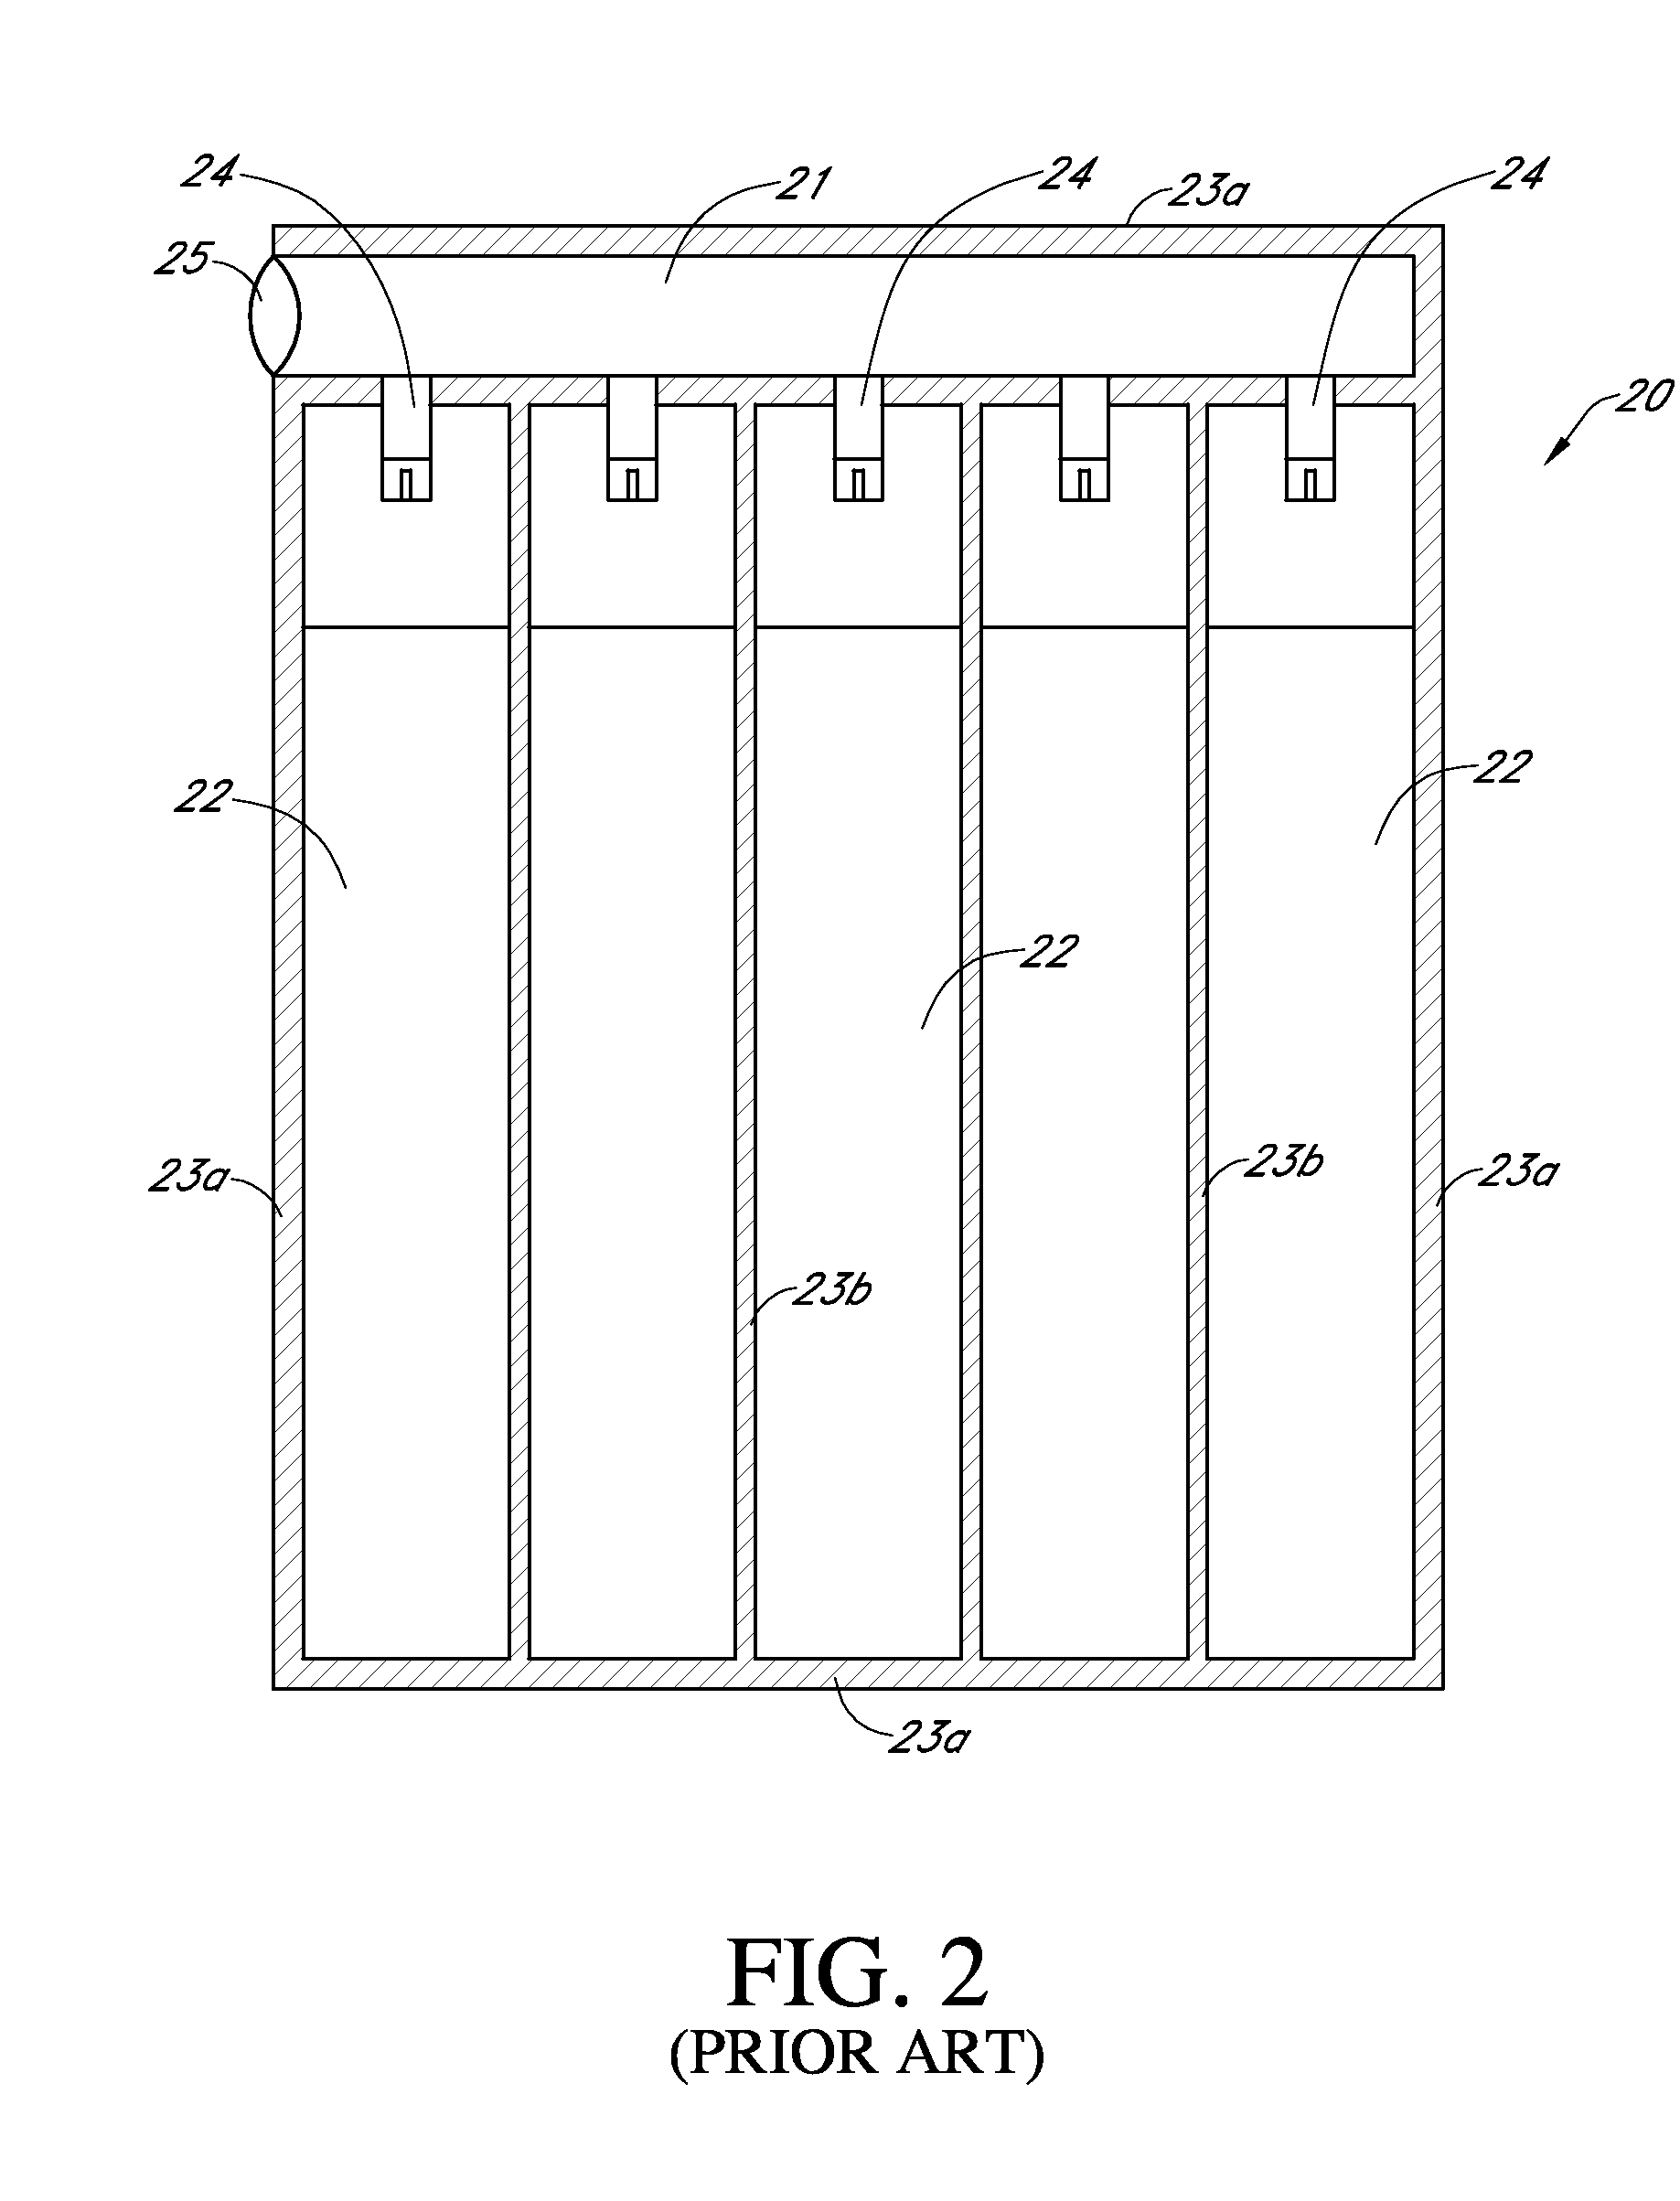 Structure of inflatable packaging device